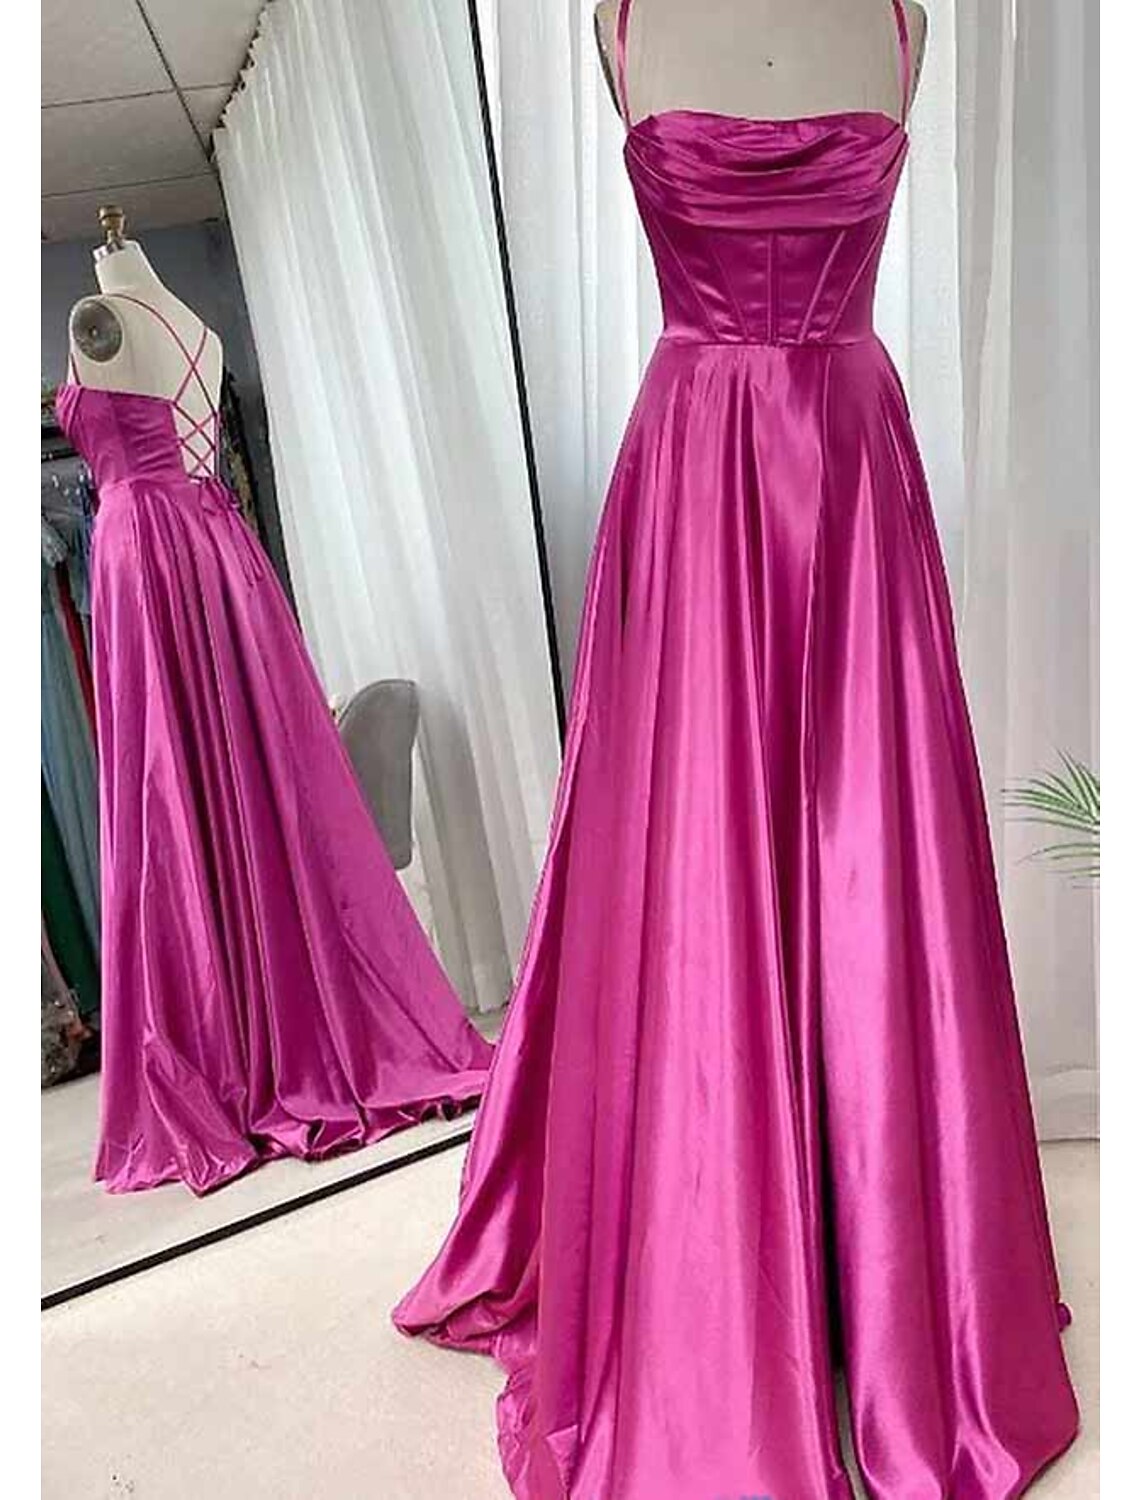 A-Line Wedding Guest Dresses Sexy Dress Party Wear Sweep / Brush Train Sleeveless Sweetheart Cotton Backless Crisscross Back with Glitter Ruched Strappy